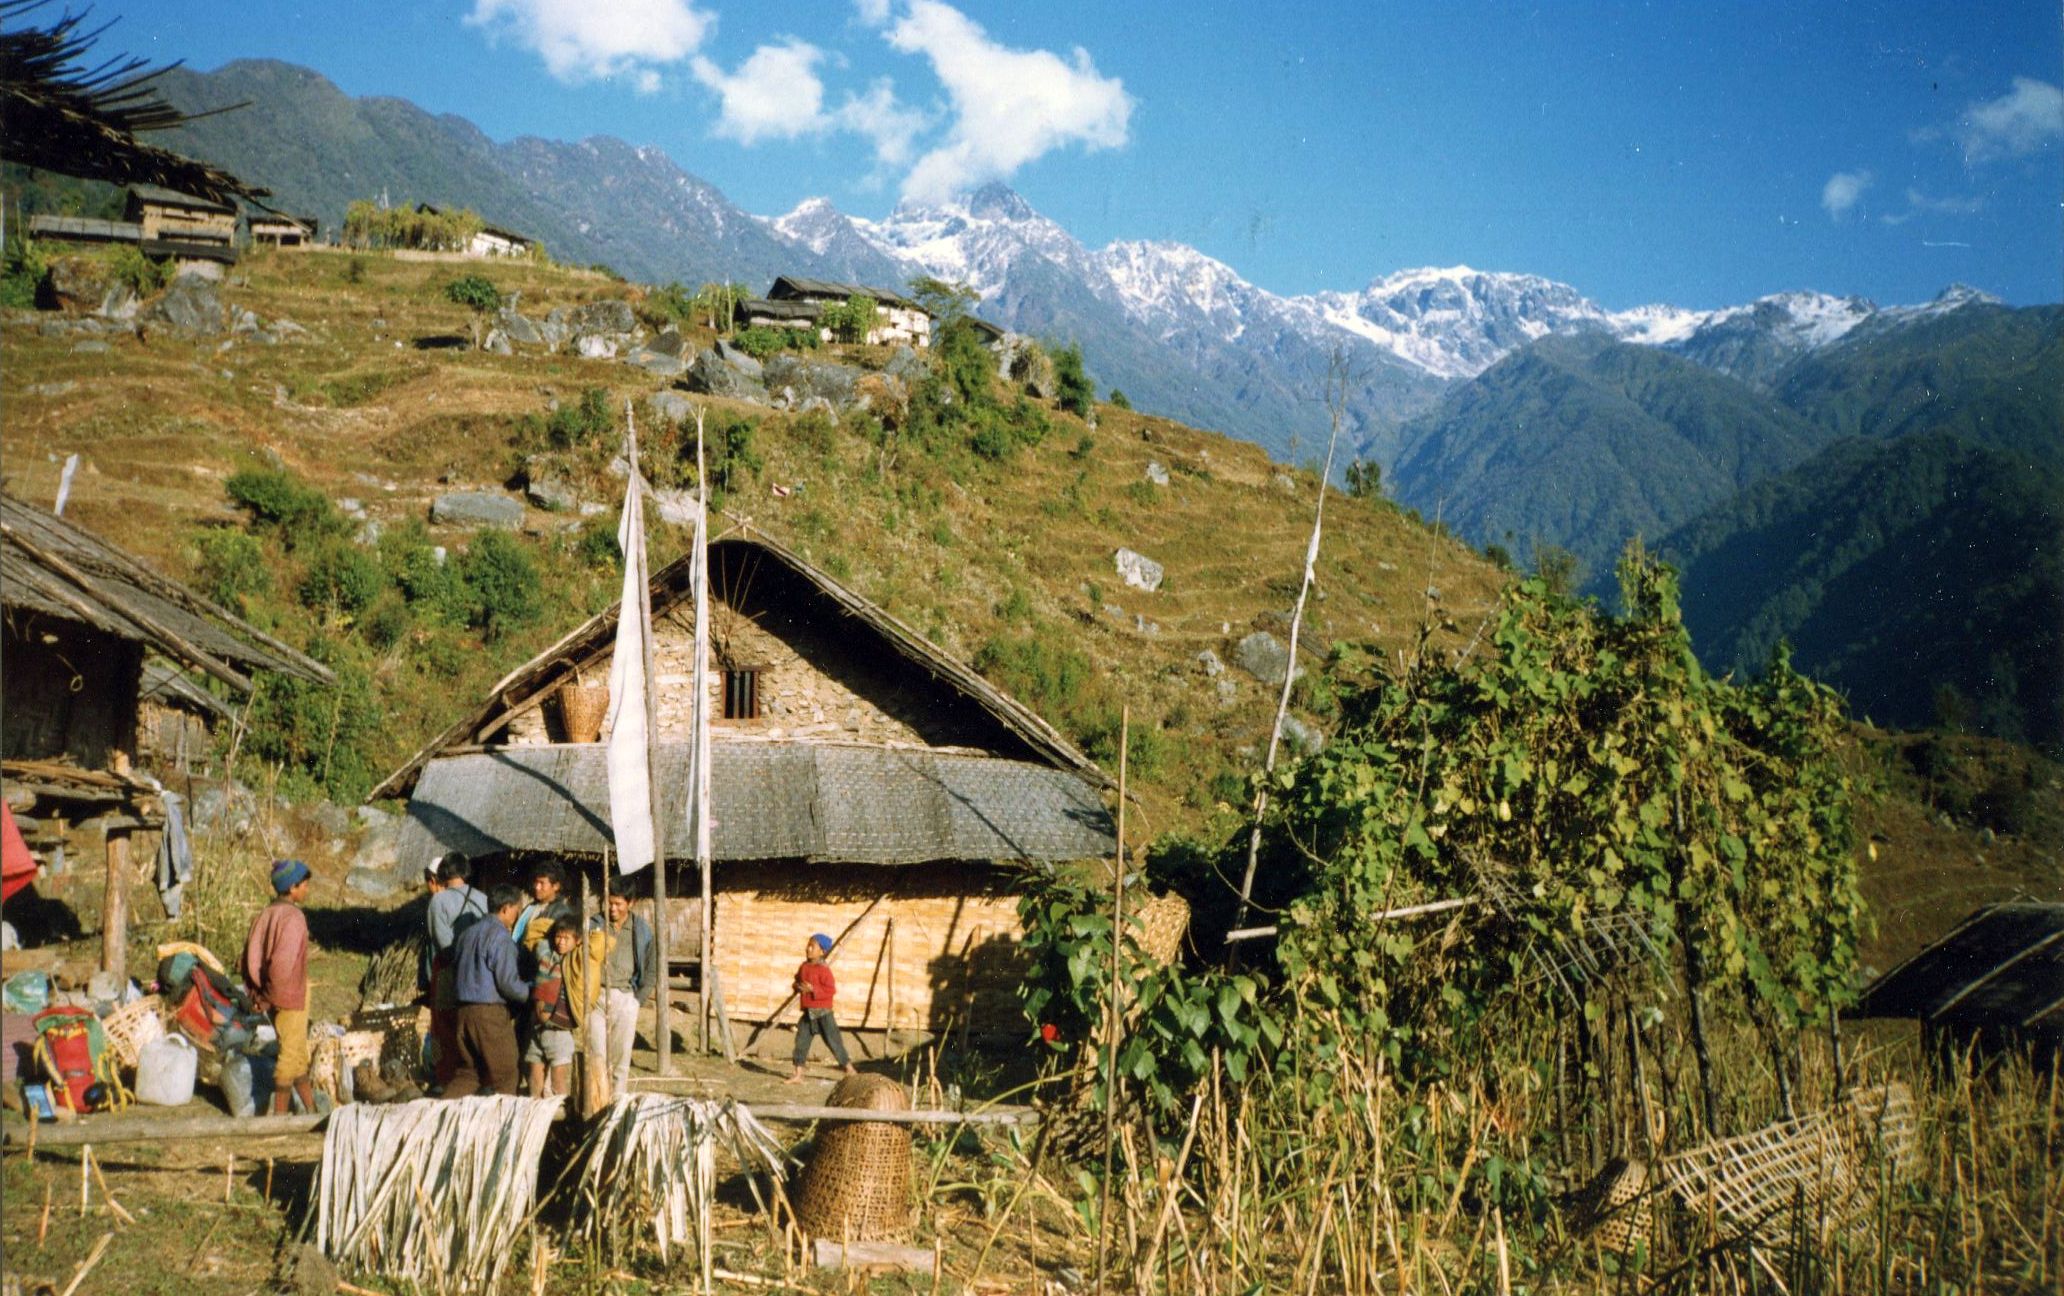 Tashigaon Village on the route to/from the Barun Valley and the Base Camp for Mount Makalu